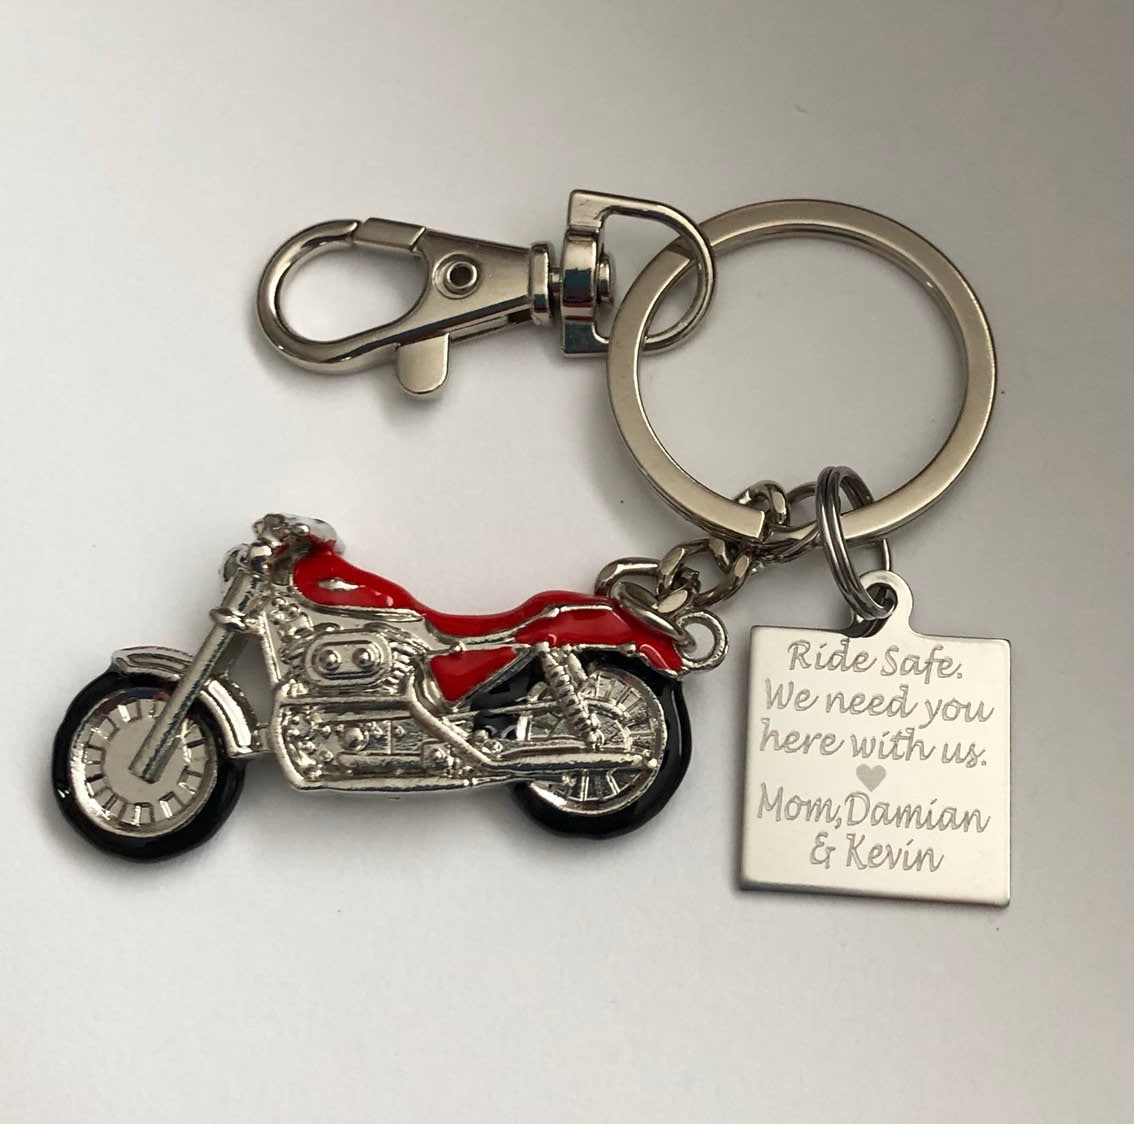 CharmZoo Motorcycle Keychain, Motorcycle Keyring with Clip, Biker Keychain, Personalized Initial Keyring, Motorcycle Charm Motorcycle Gifts for Women